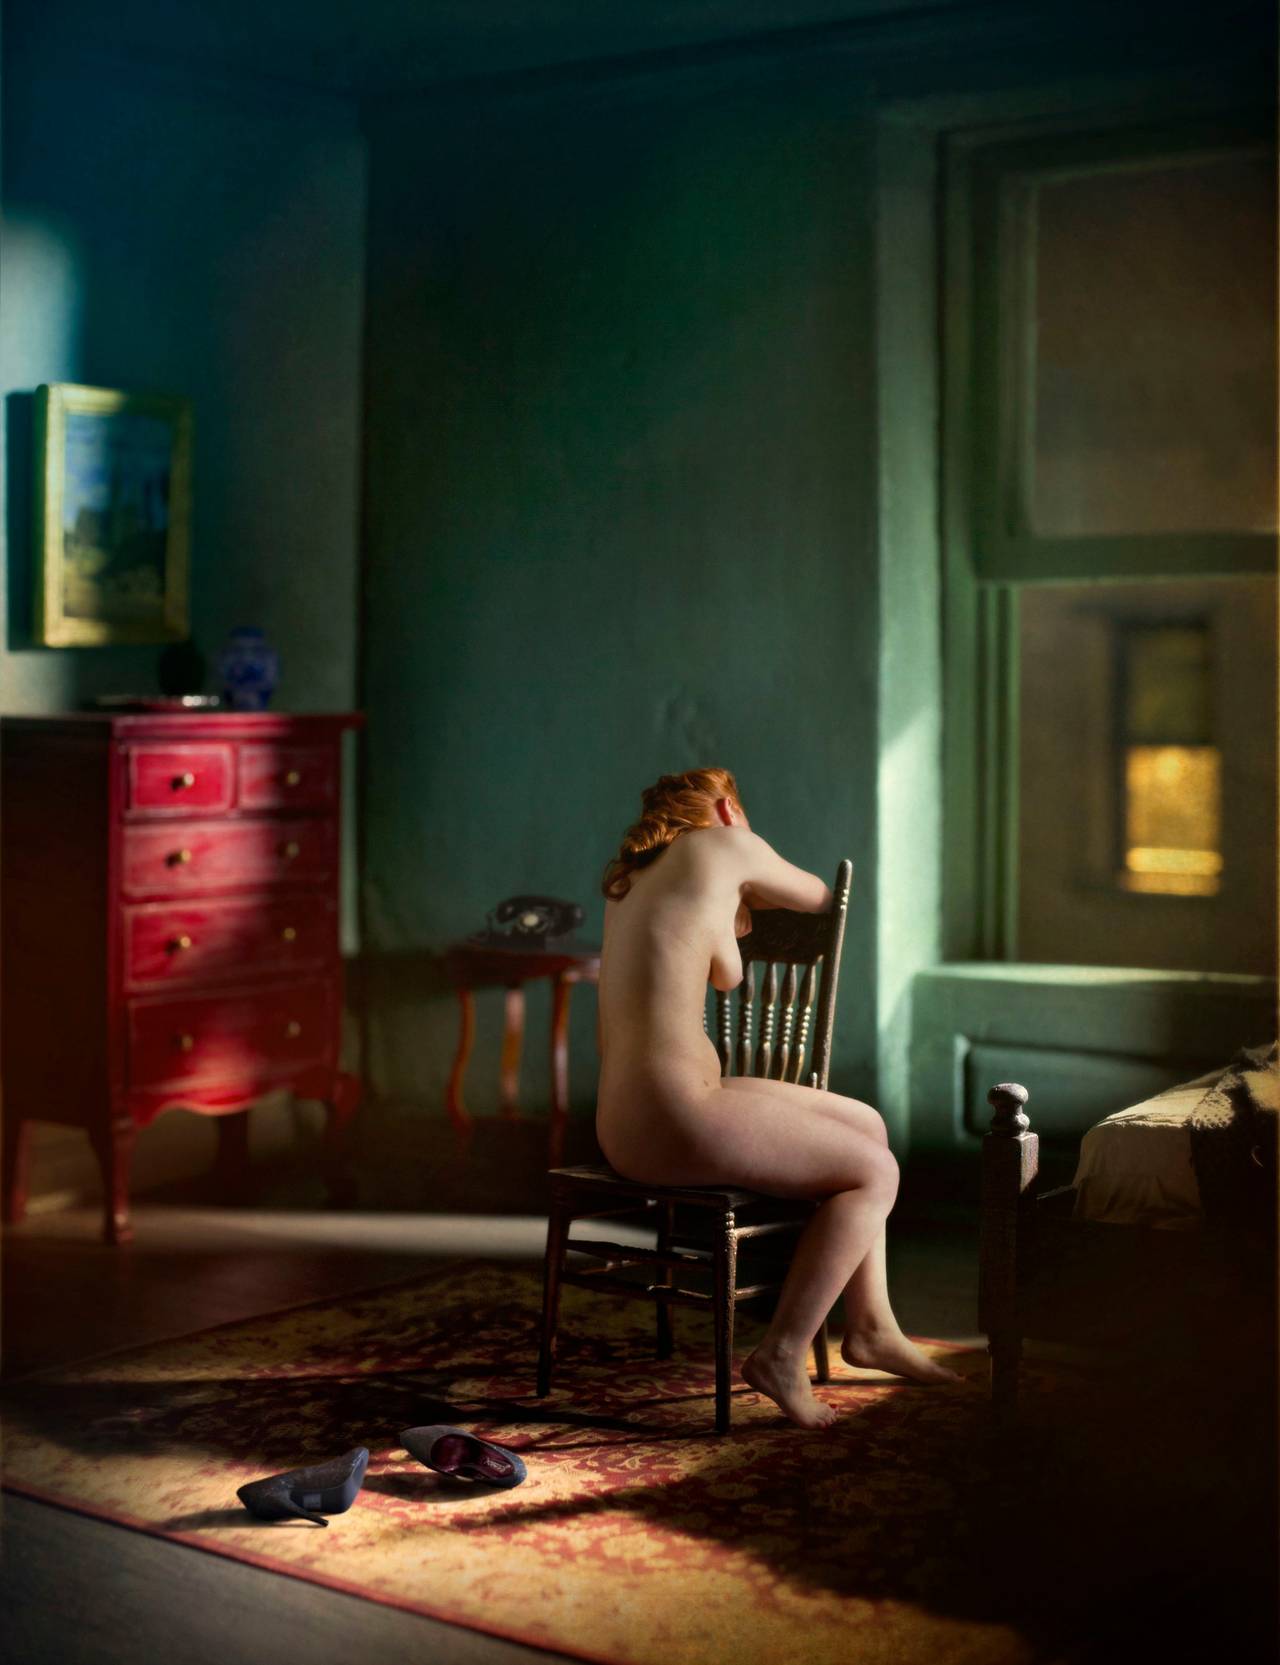 Richard Tuschman Portrait Photograph - Green Bedroom #2 (4am),  limited edition photograph, signed and numbered